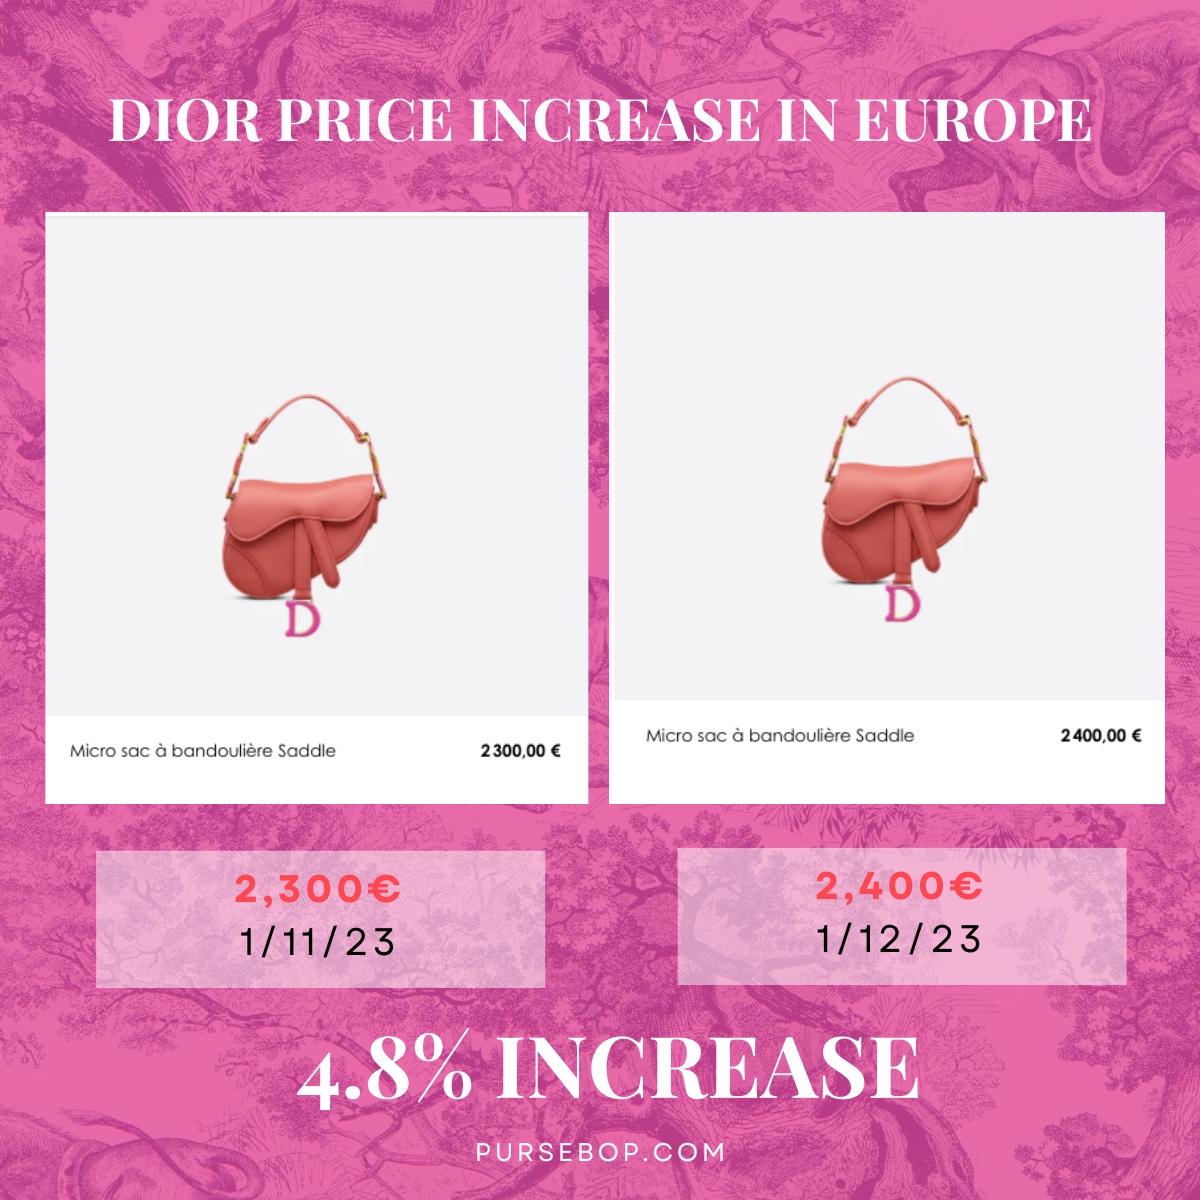 Dior Price Increase Of 2023 Explained